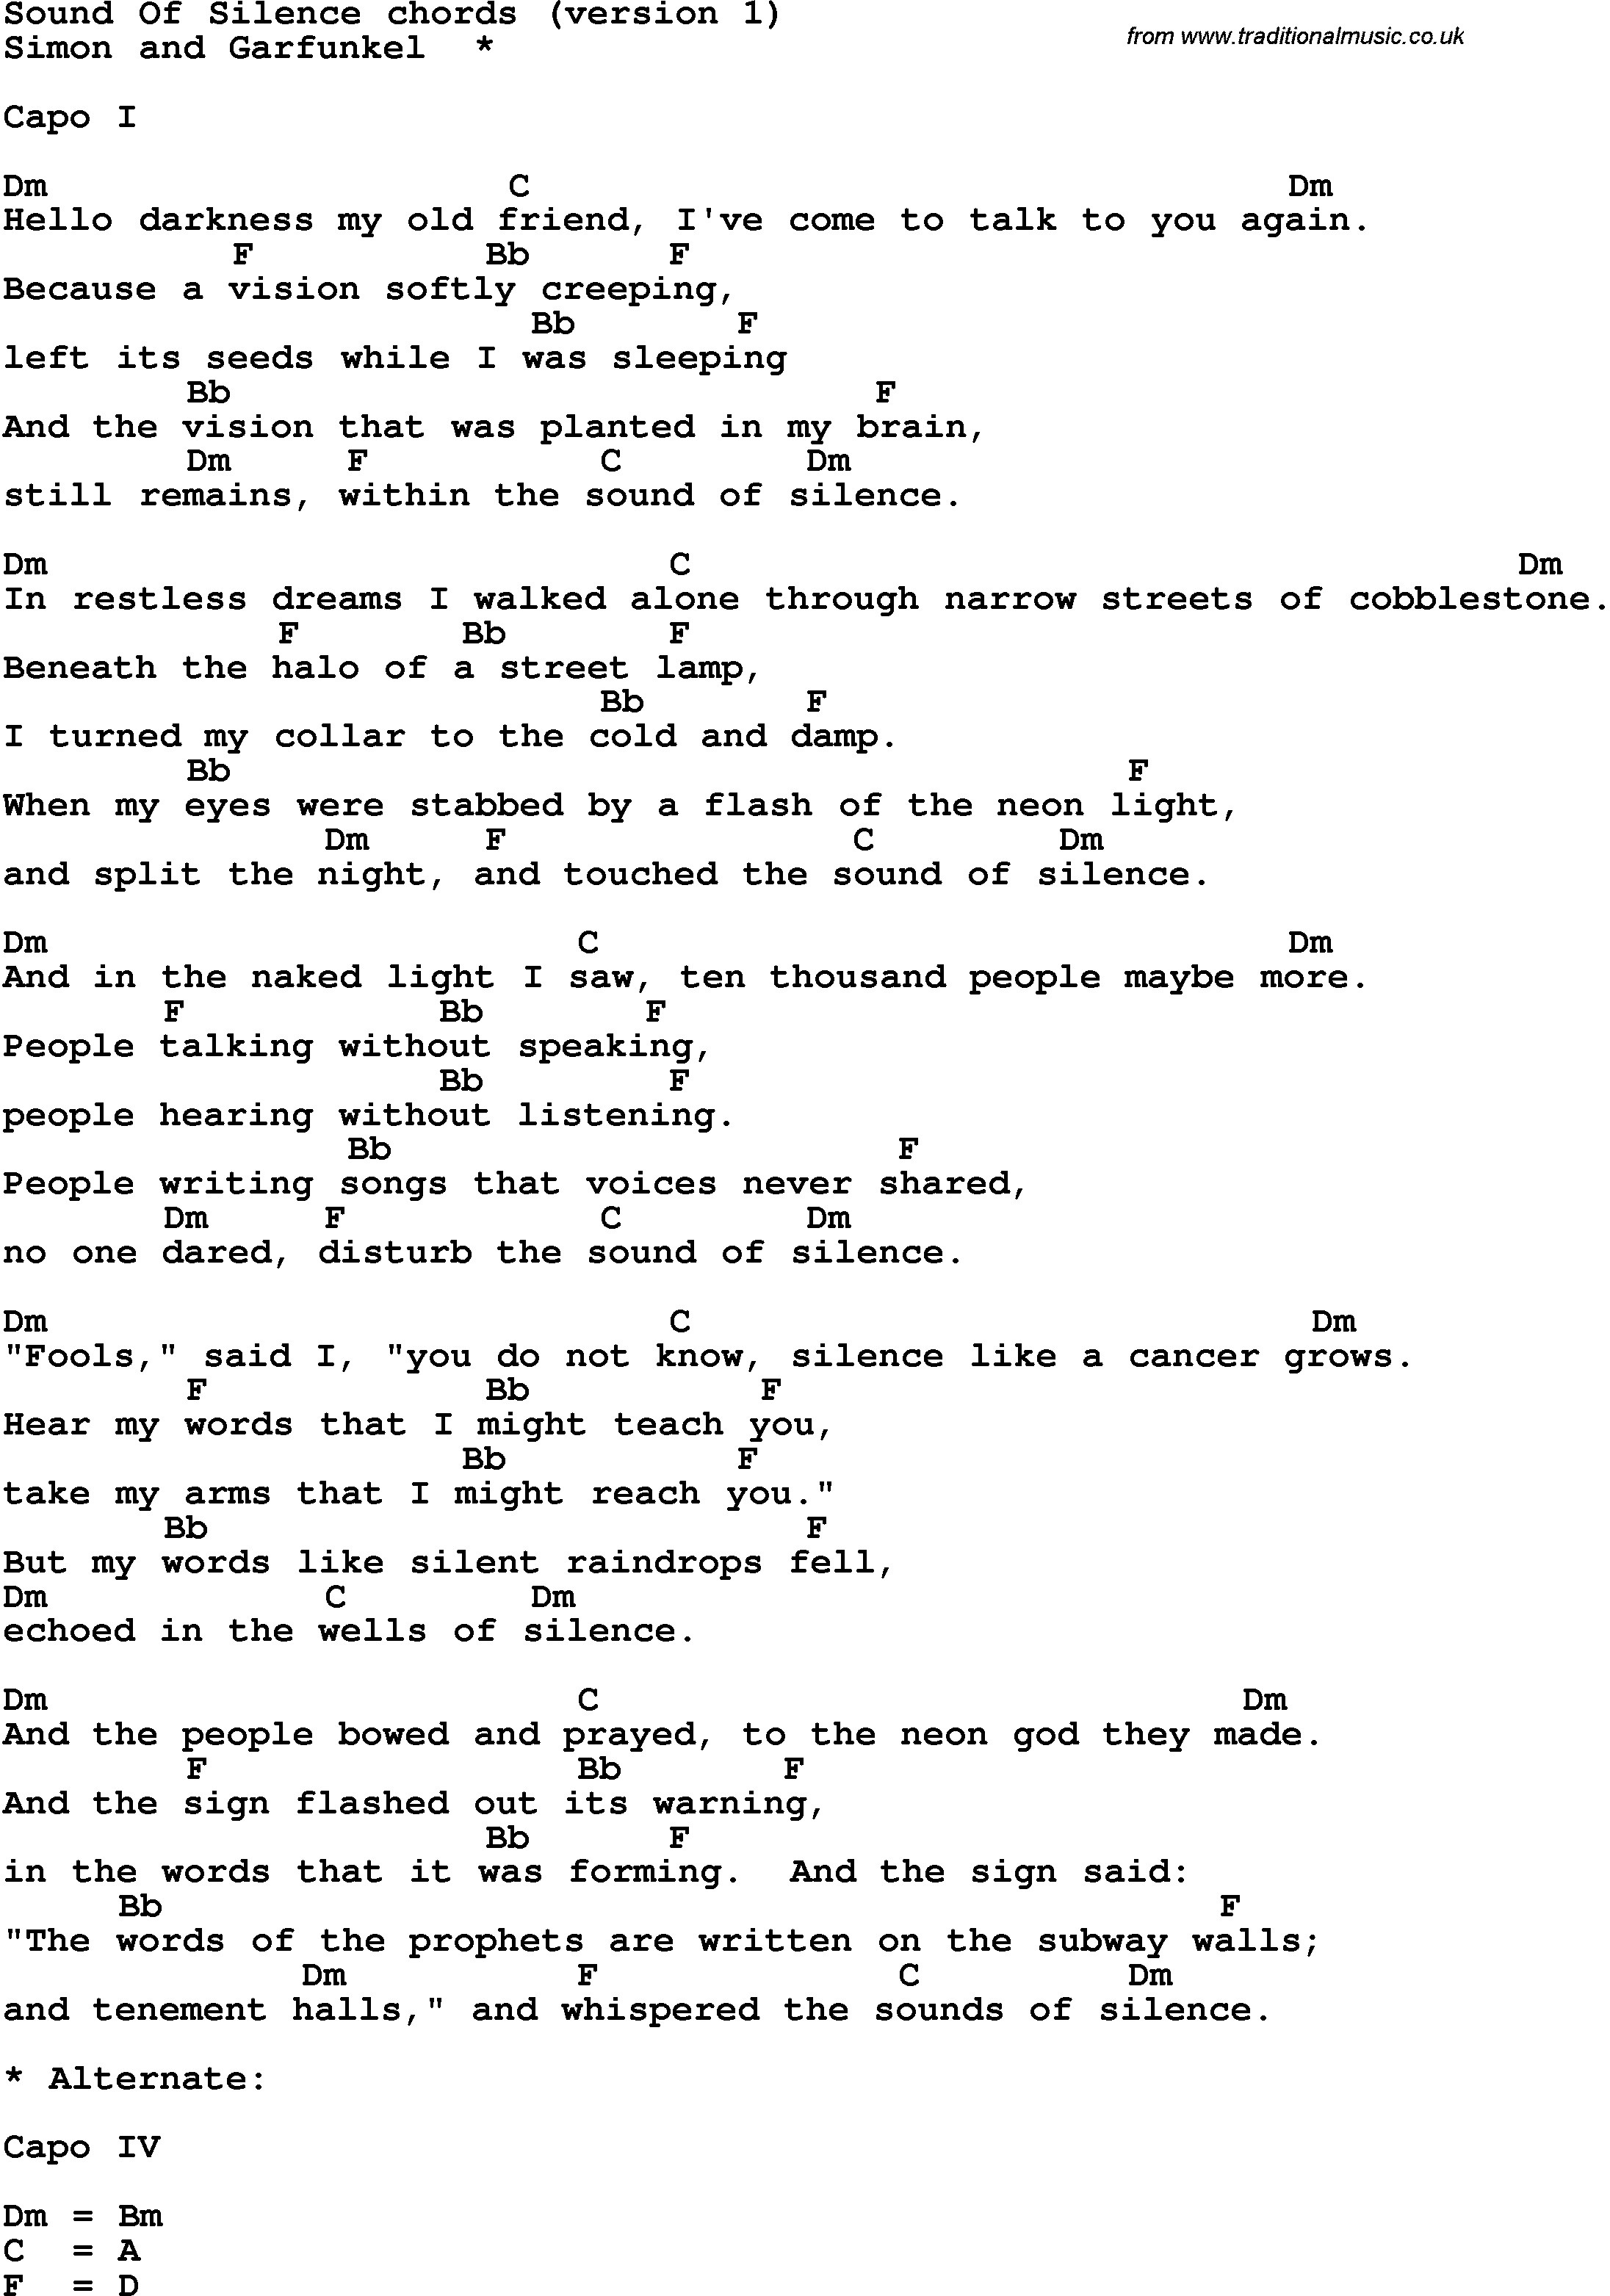 Song Lyrics with guitar chords for Sound Of Silence